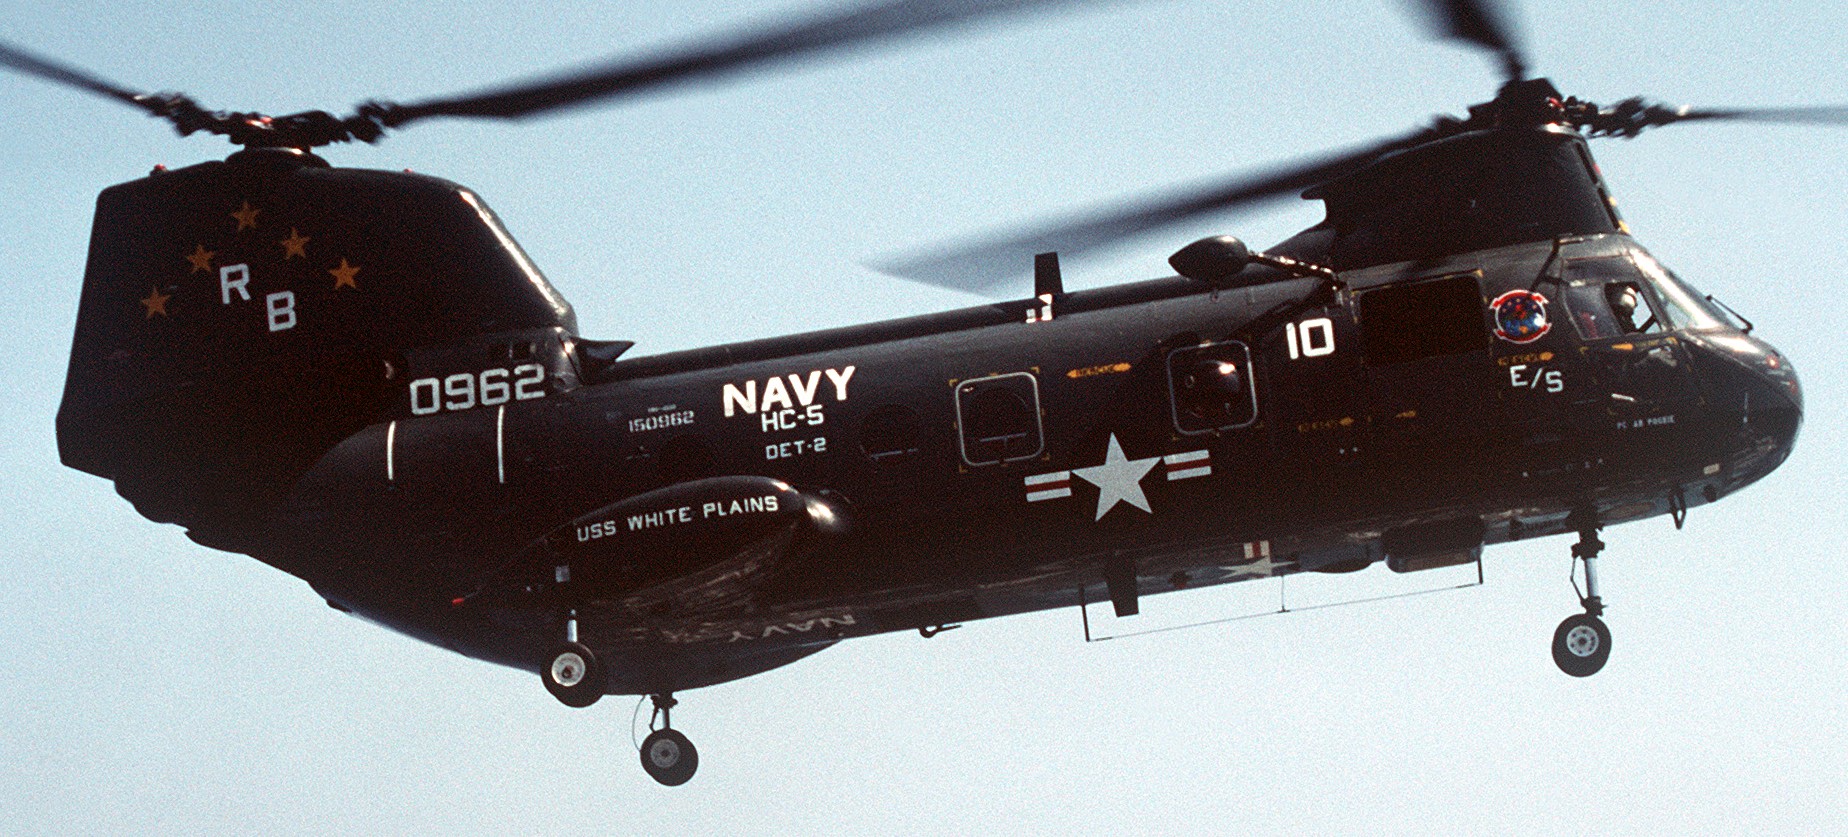 hc-5 providers helicopter combat support squadron navy hh-46 sea knight 50